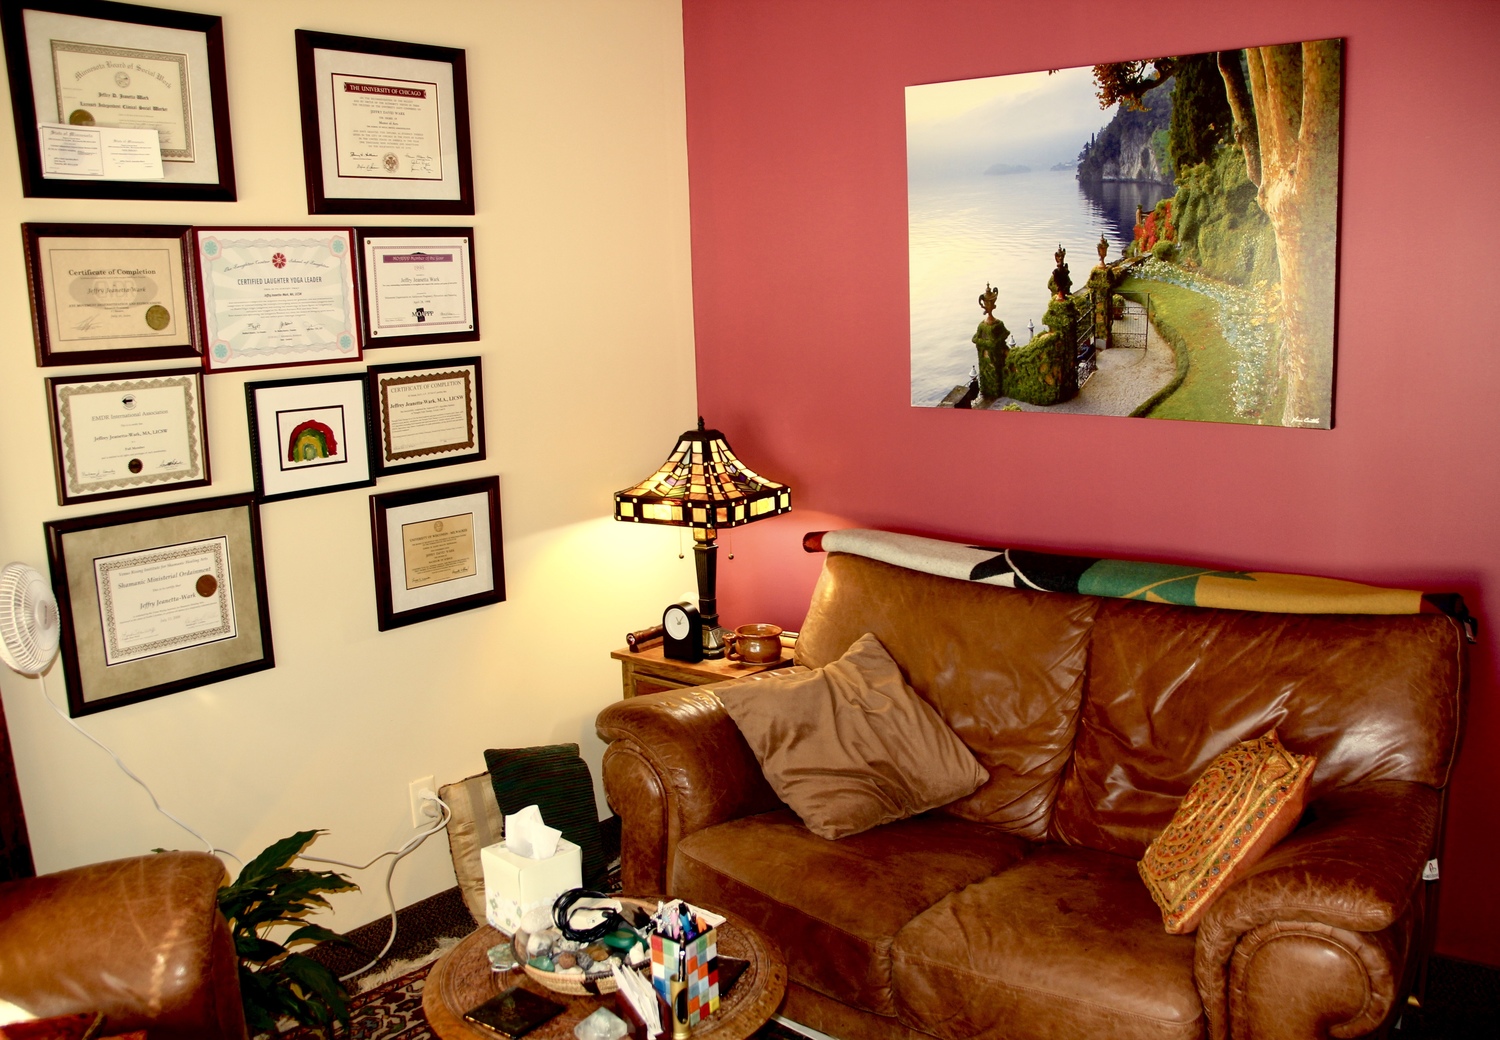 Gallery Photo of Jeffry's therapy room.